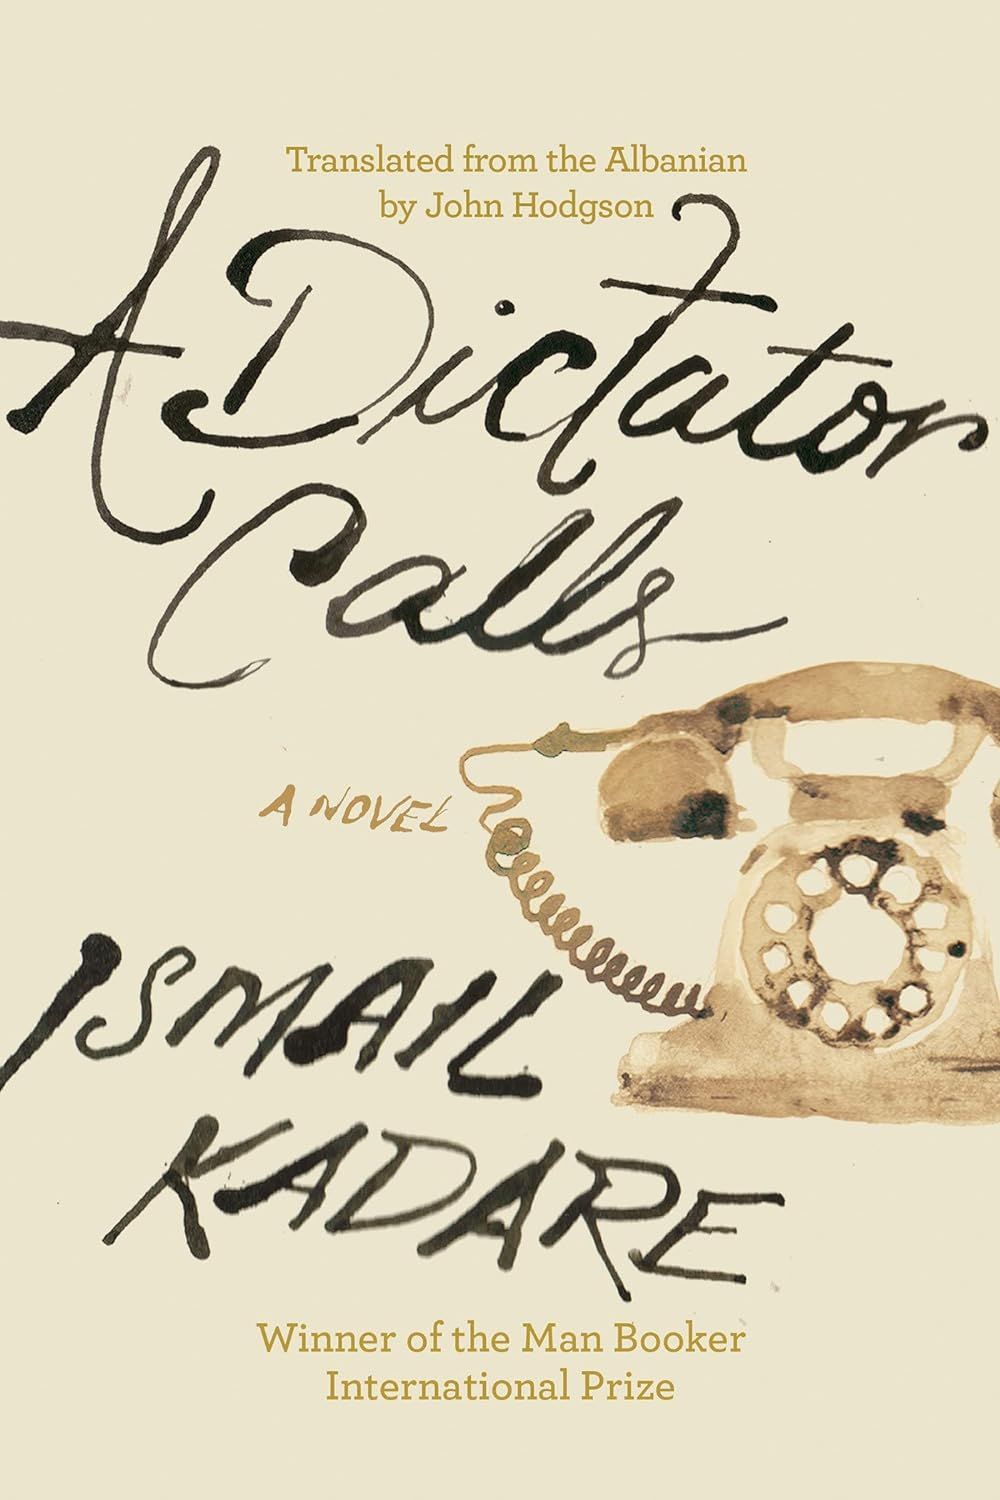 Art Receives No Mercy but Only Gives It: On Ismail Kadare’s “A Dictator Calls”